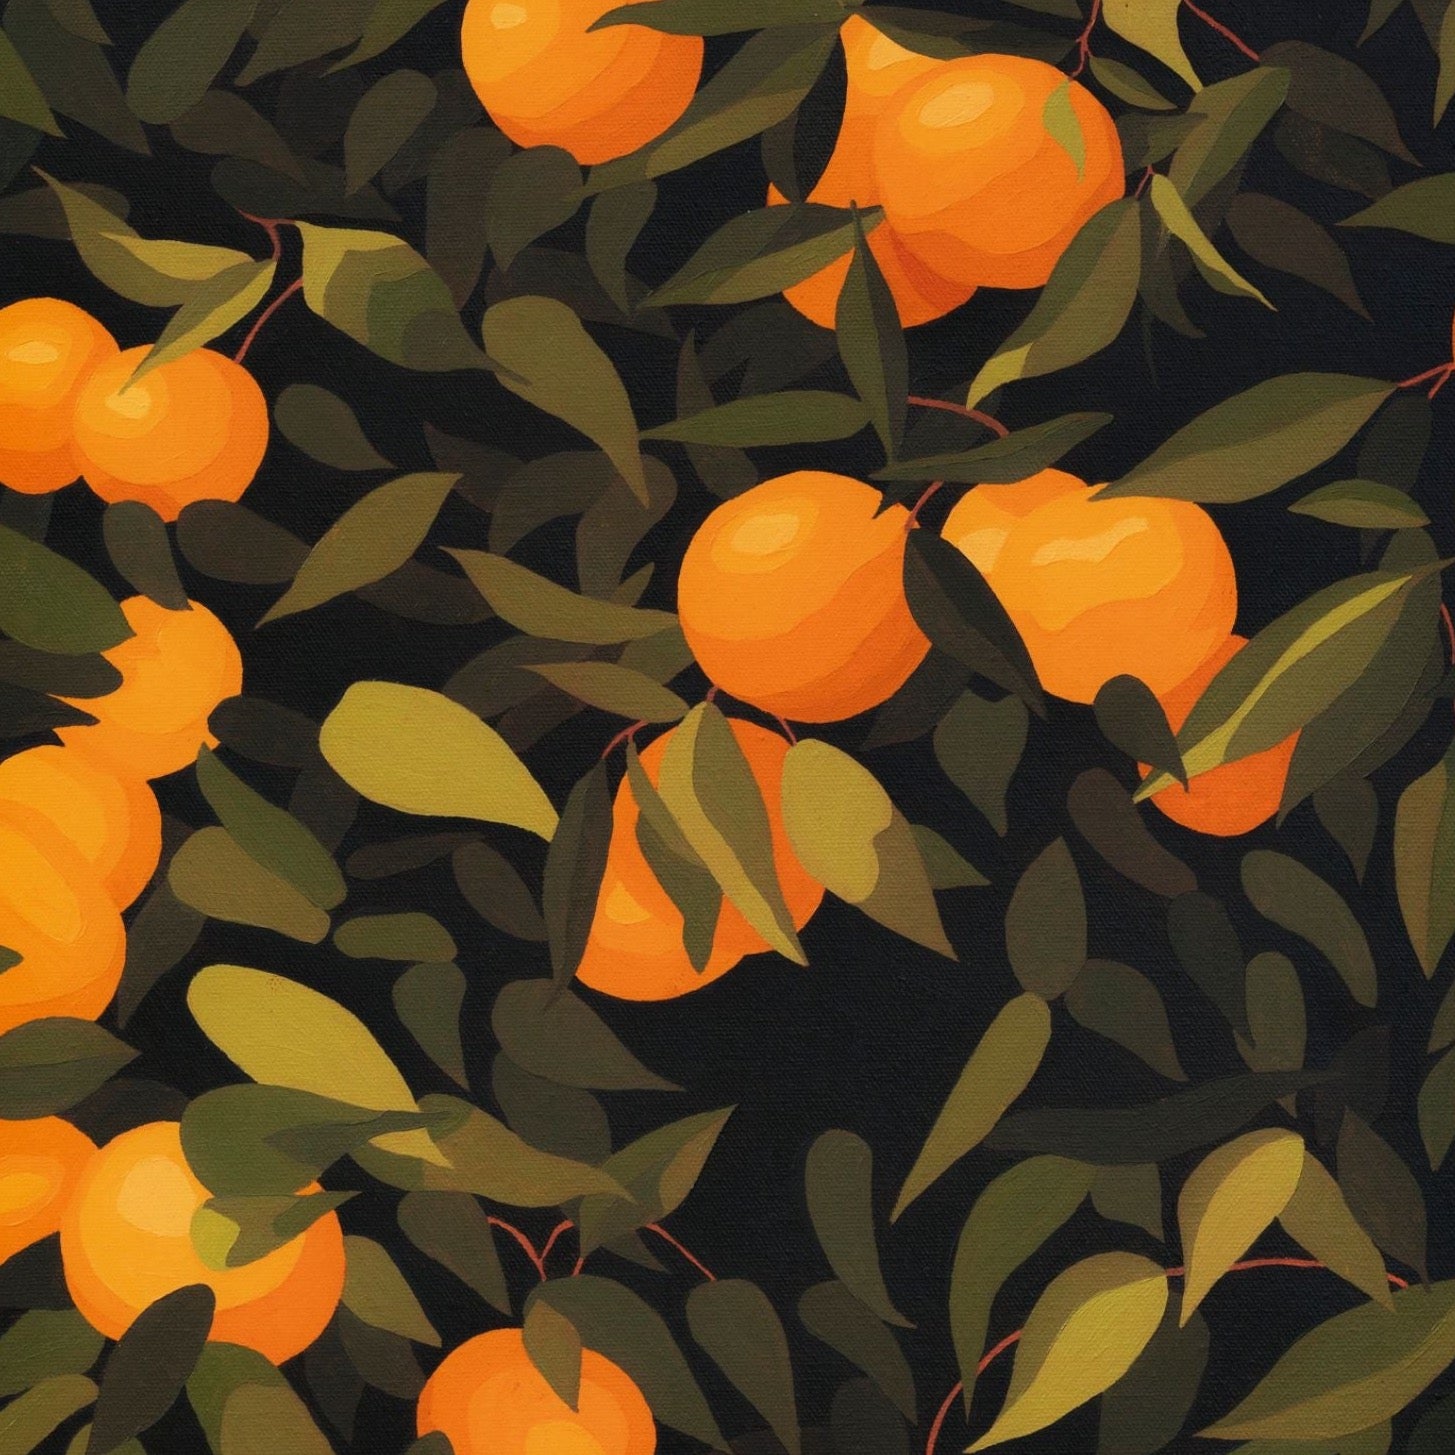 original oil painting of mandarines with green leaves on a dark green background